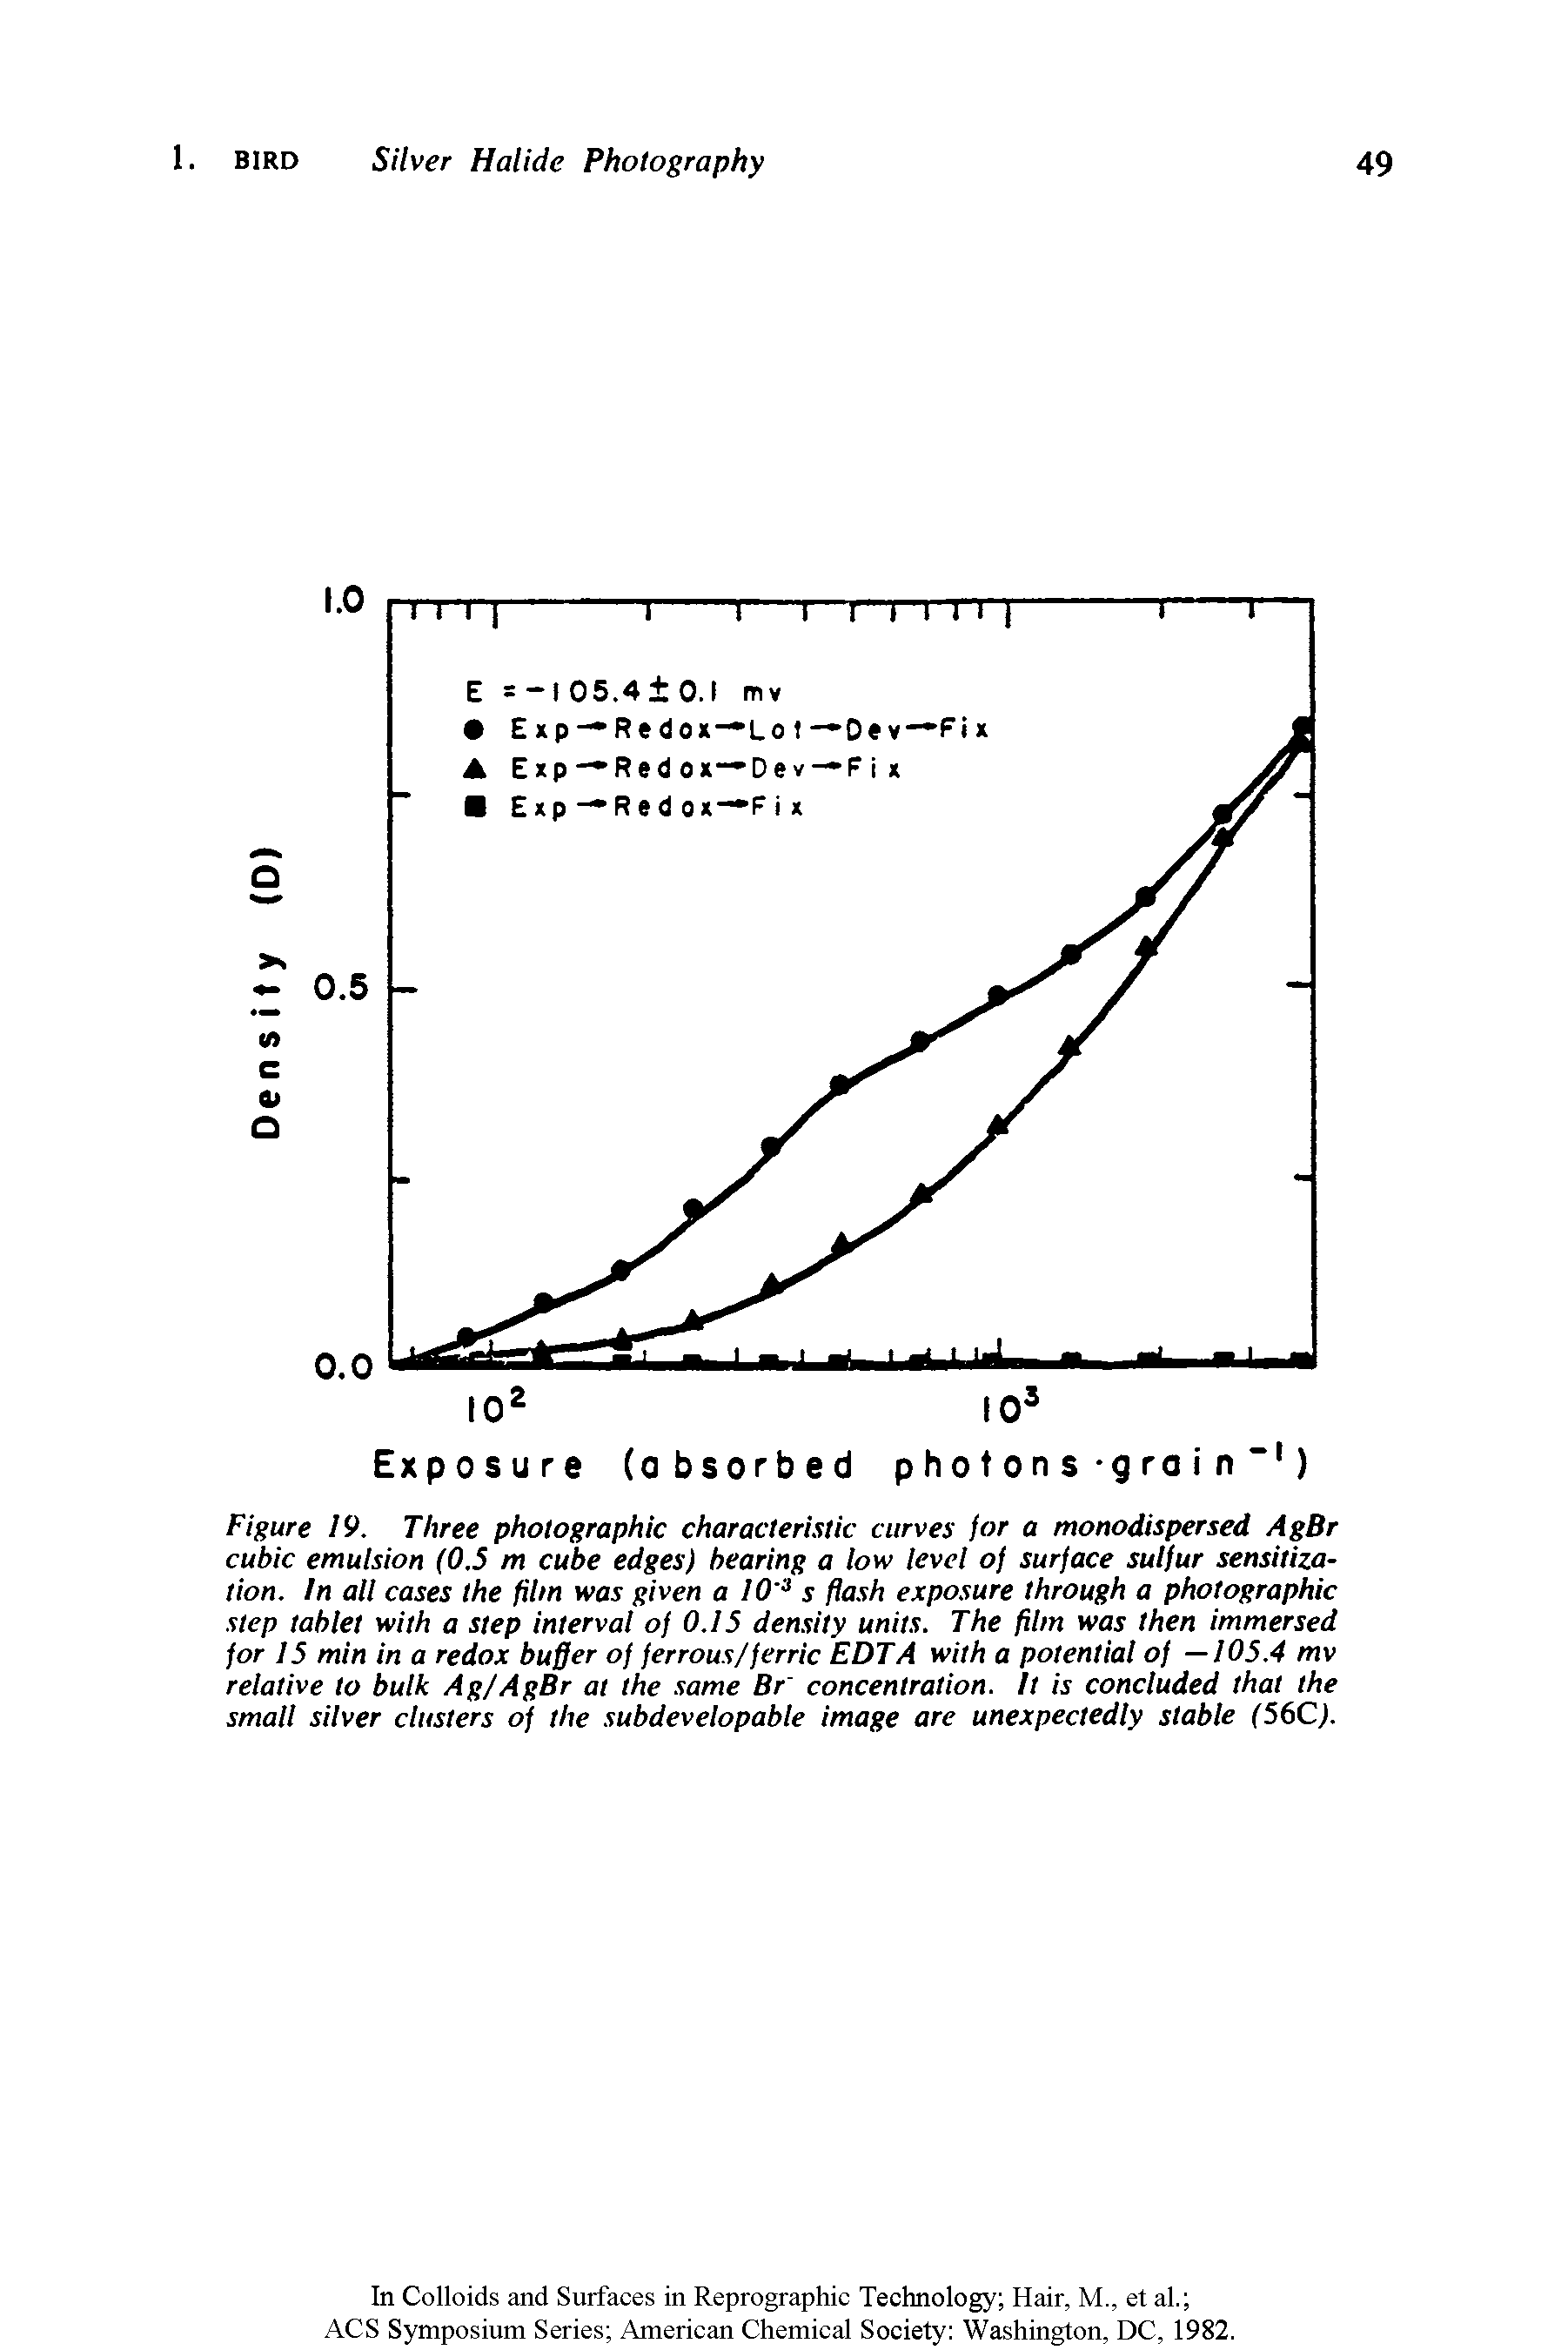 Figure 19. Three photographic characteristic curves for a monodispersed AgBr cubic emulsion (0.5 m cube edges) bearing a low level of surface sulfur sensitization. In all cases the film was given a 10 3 s flash exposure through a photographic step tablet with a step interval of 0.15 density units. The film was then immersed for 15 min in a redox buffer of ferrous/ferric EDTA with a potential of —105.4 mv relative to bulk Ag/AgBr at the same Br concentration. It is concluded that the small silver clusters of the subdevelopable image are unexpectedly stable (56C).